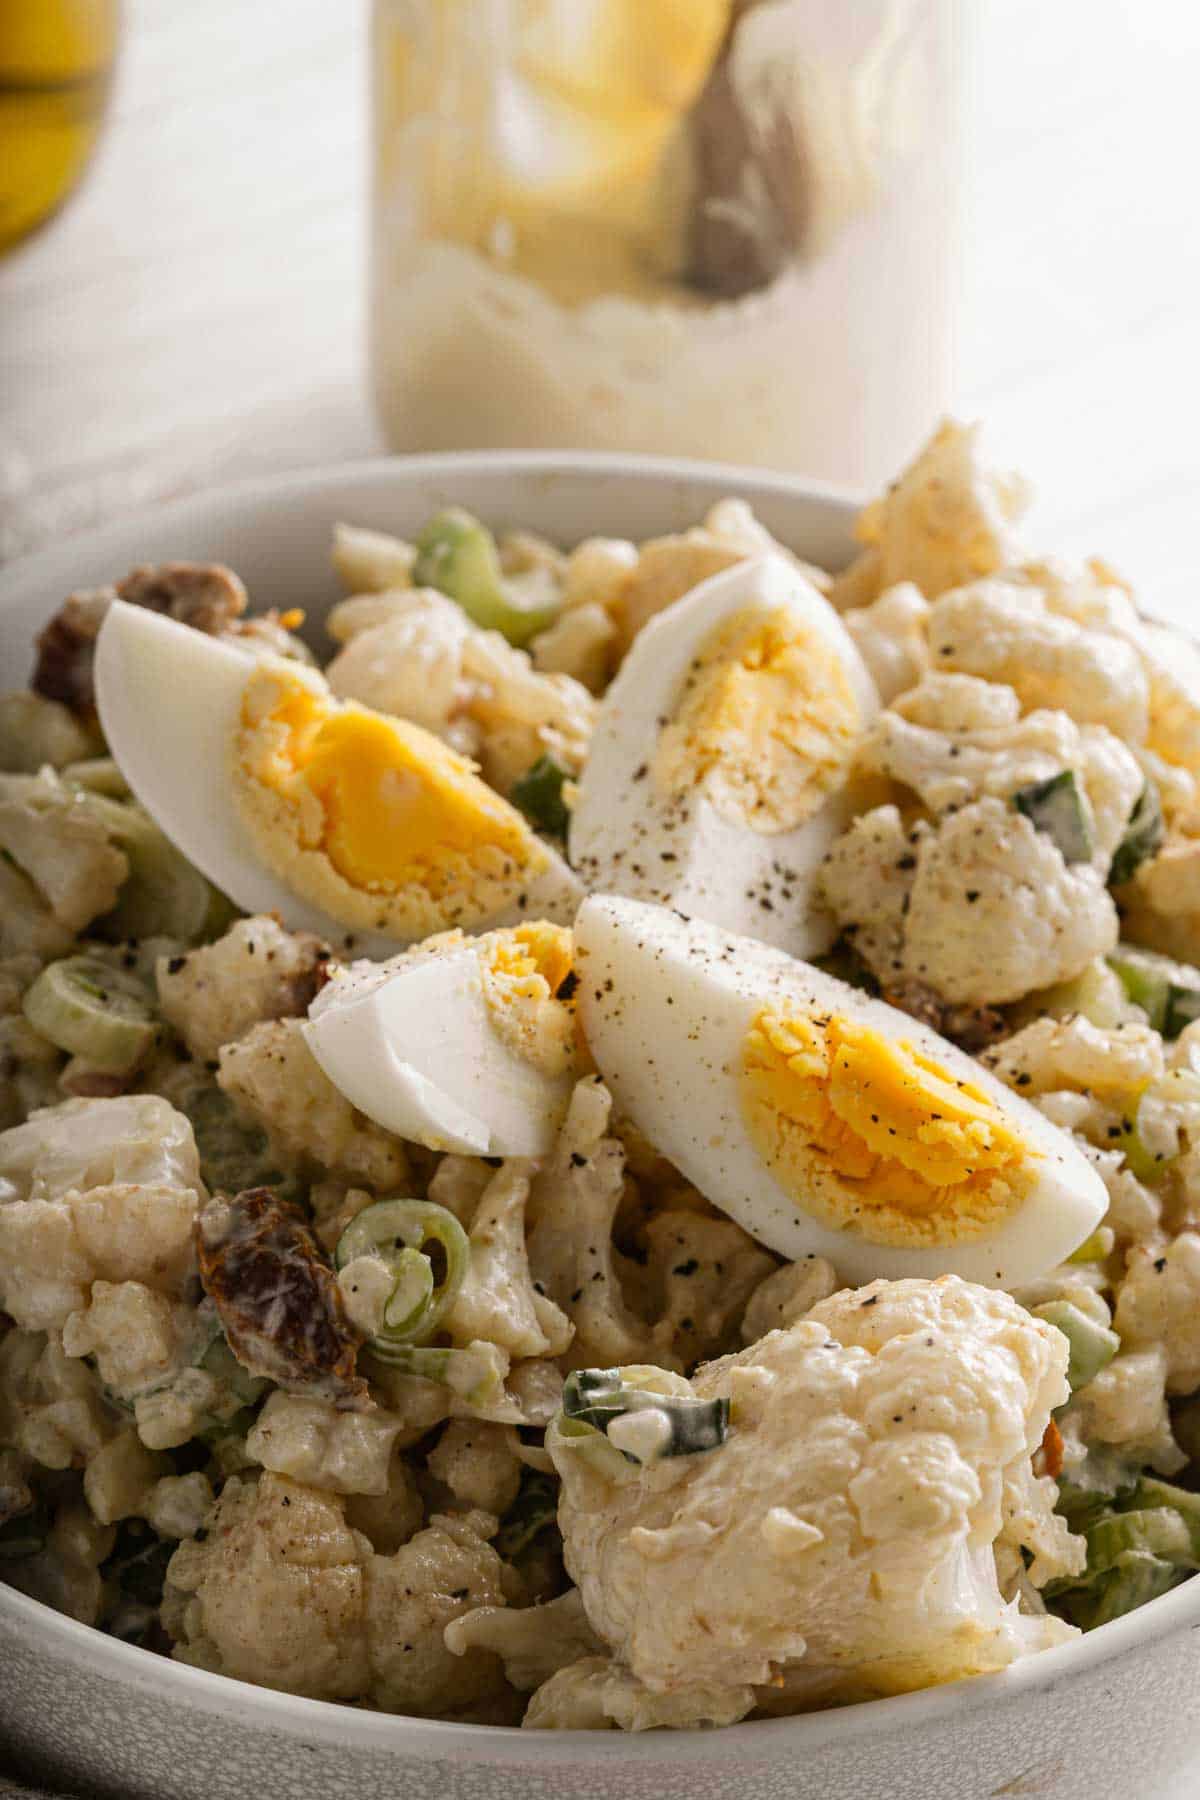 A bowl of cauliflower salad with a hard boiled egg.